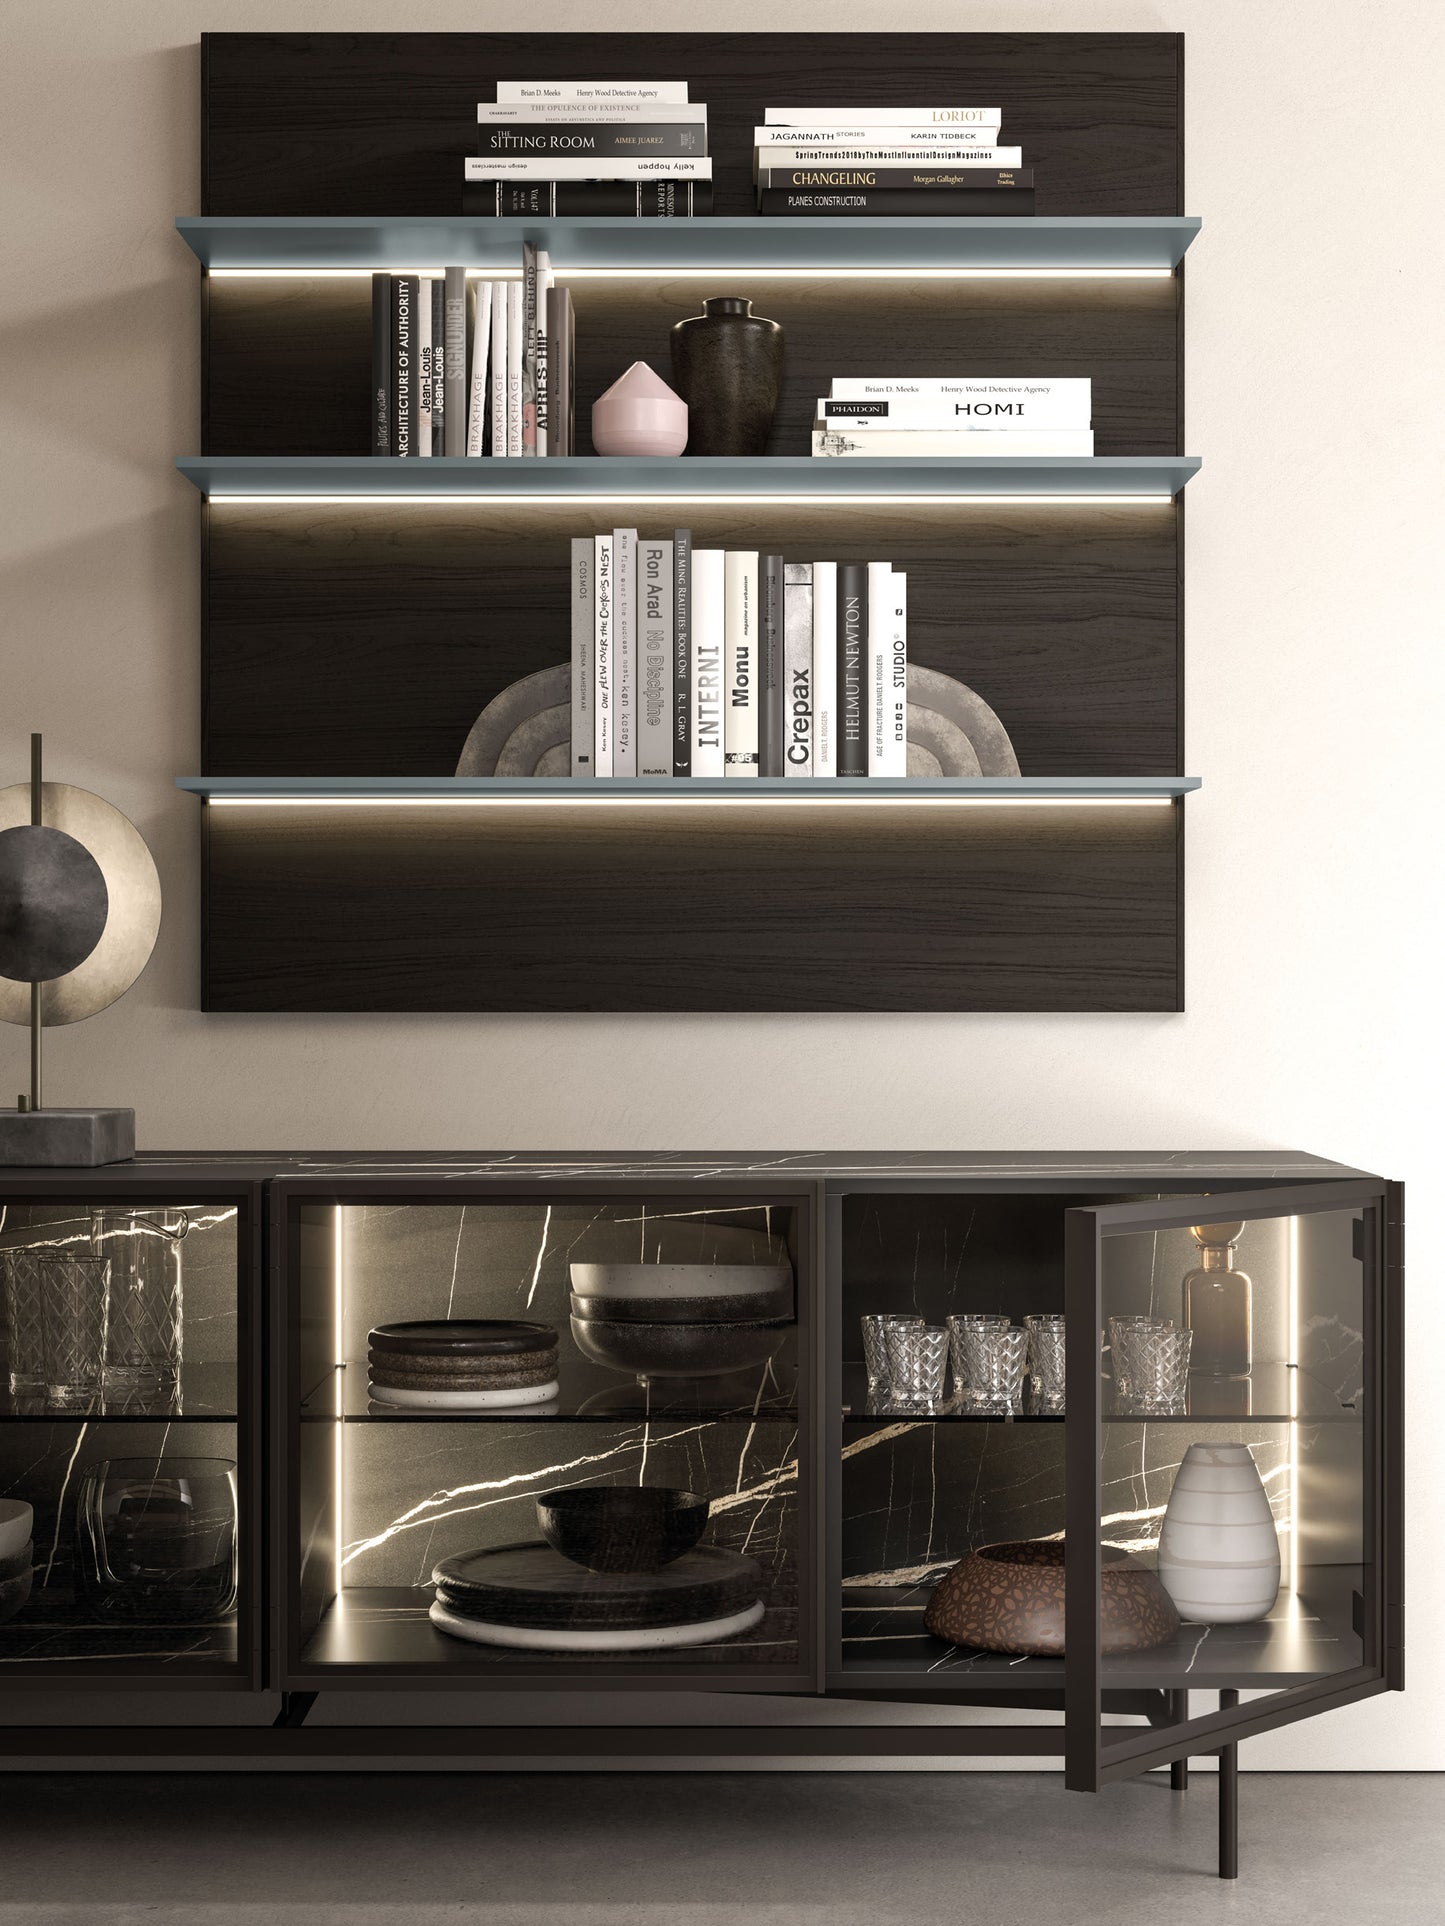 Day 11-23 Bookcase Wall Unit by Orme Design